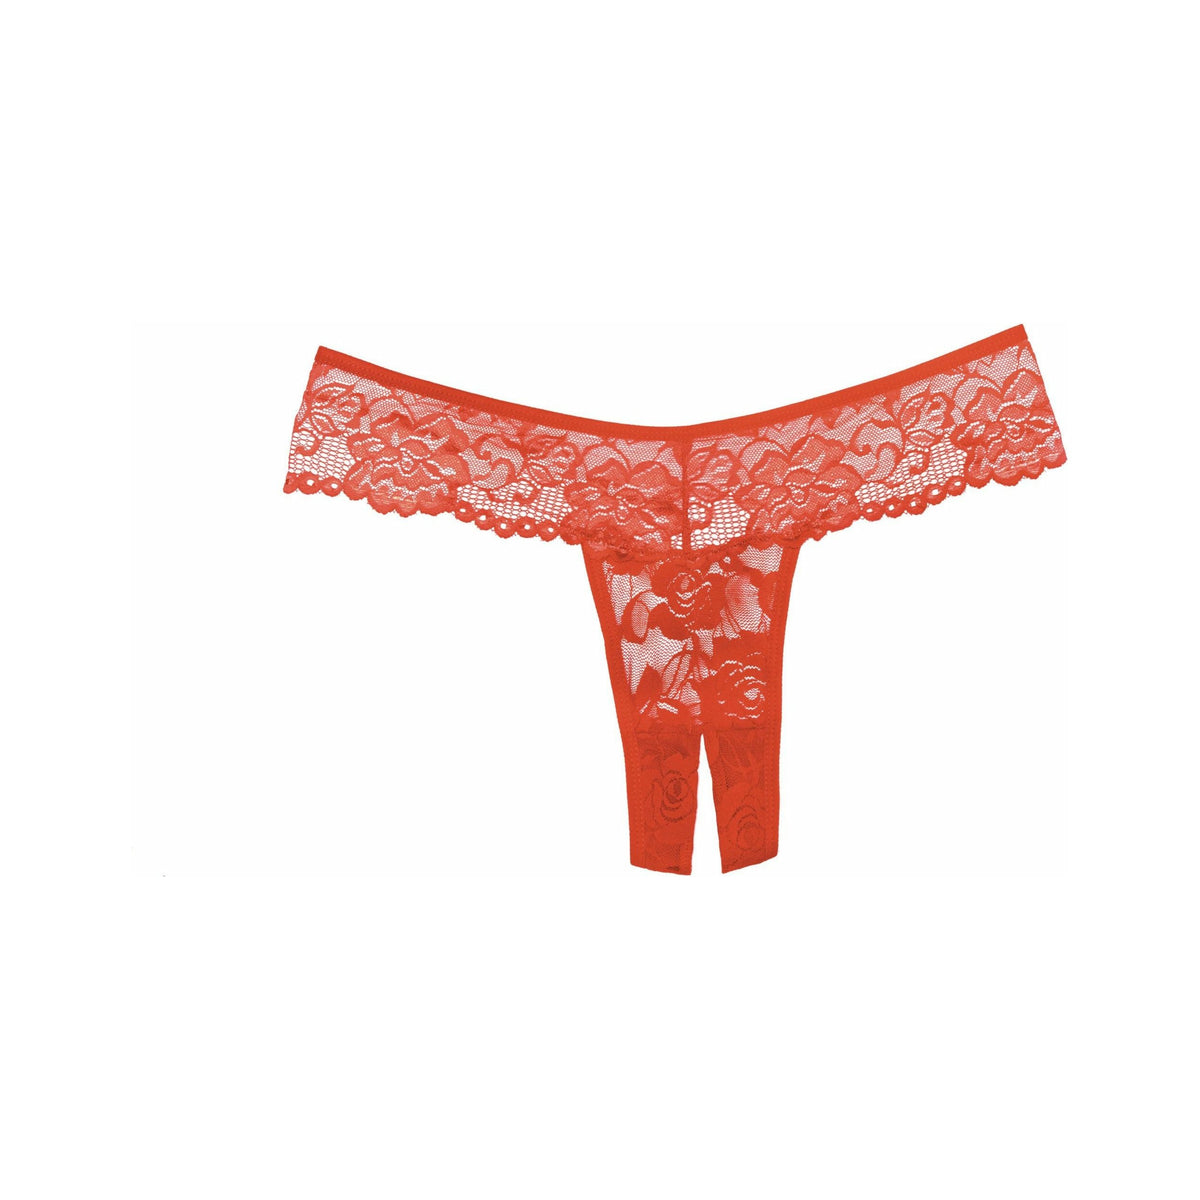 Allure Adore – Chiqui Love Panty – Red – One Size